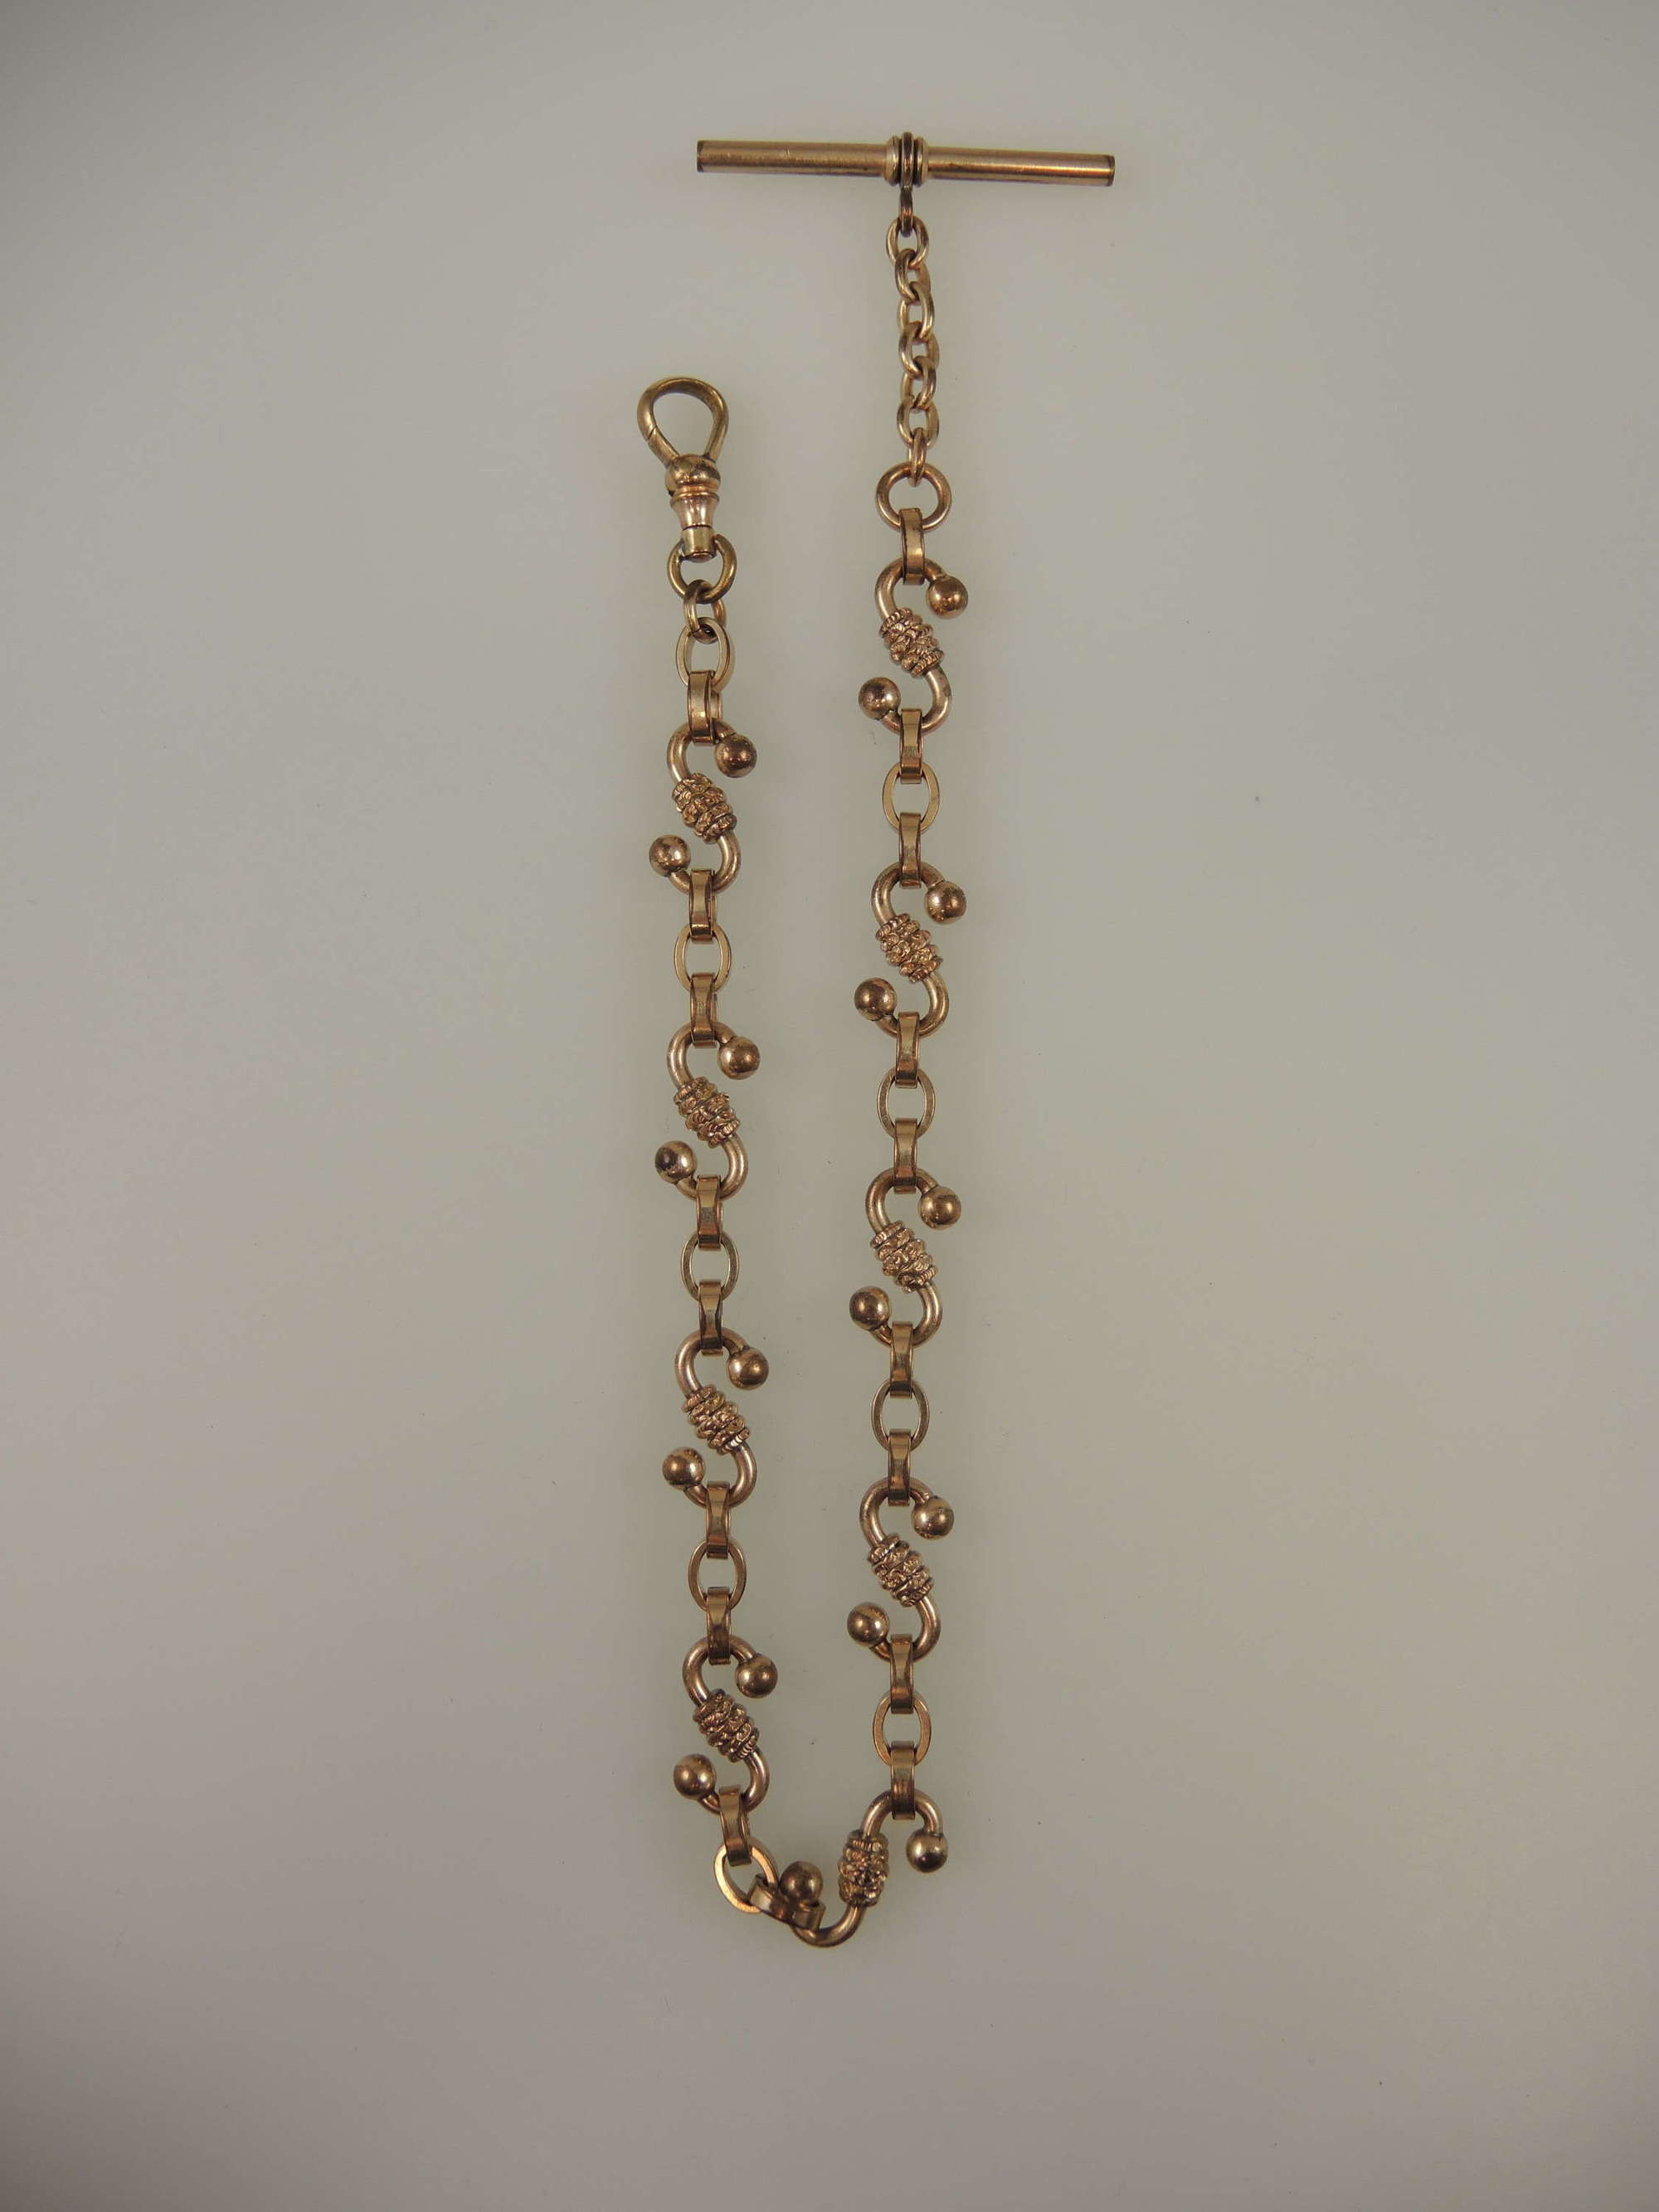 Superb gold plated Victorian pocket watch chain c1890